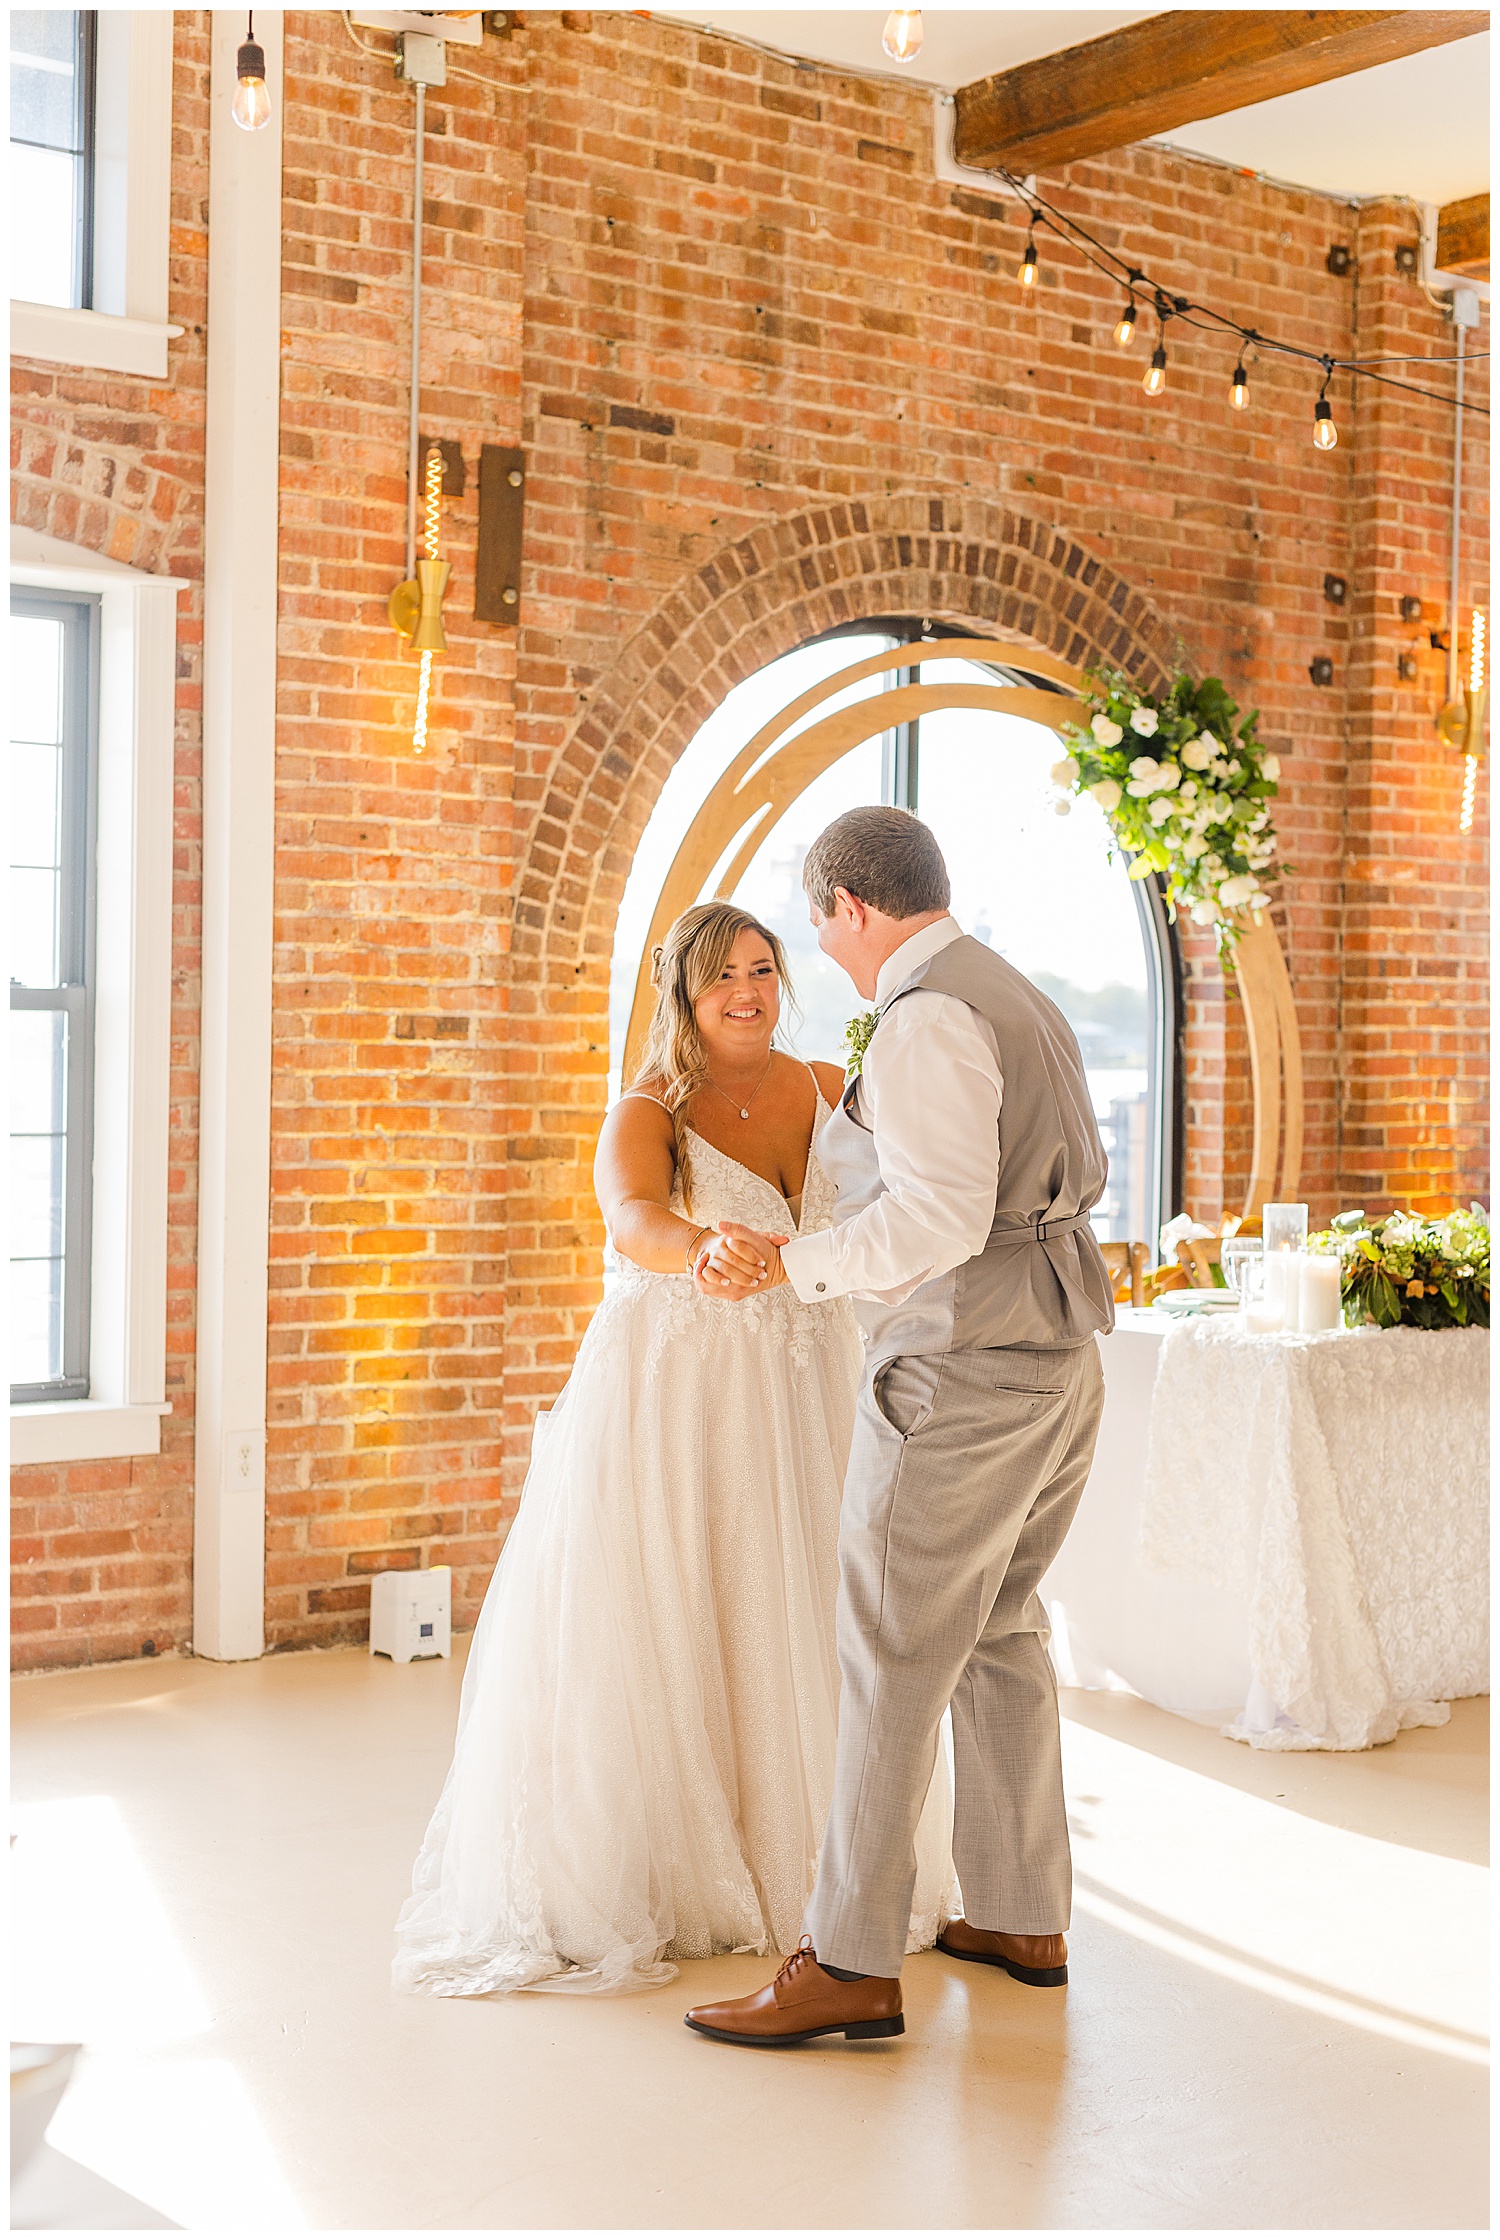 bride and groom first dance at The River Room wedding venue